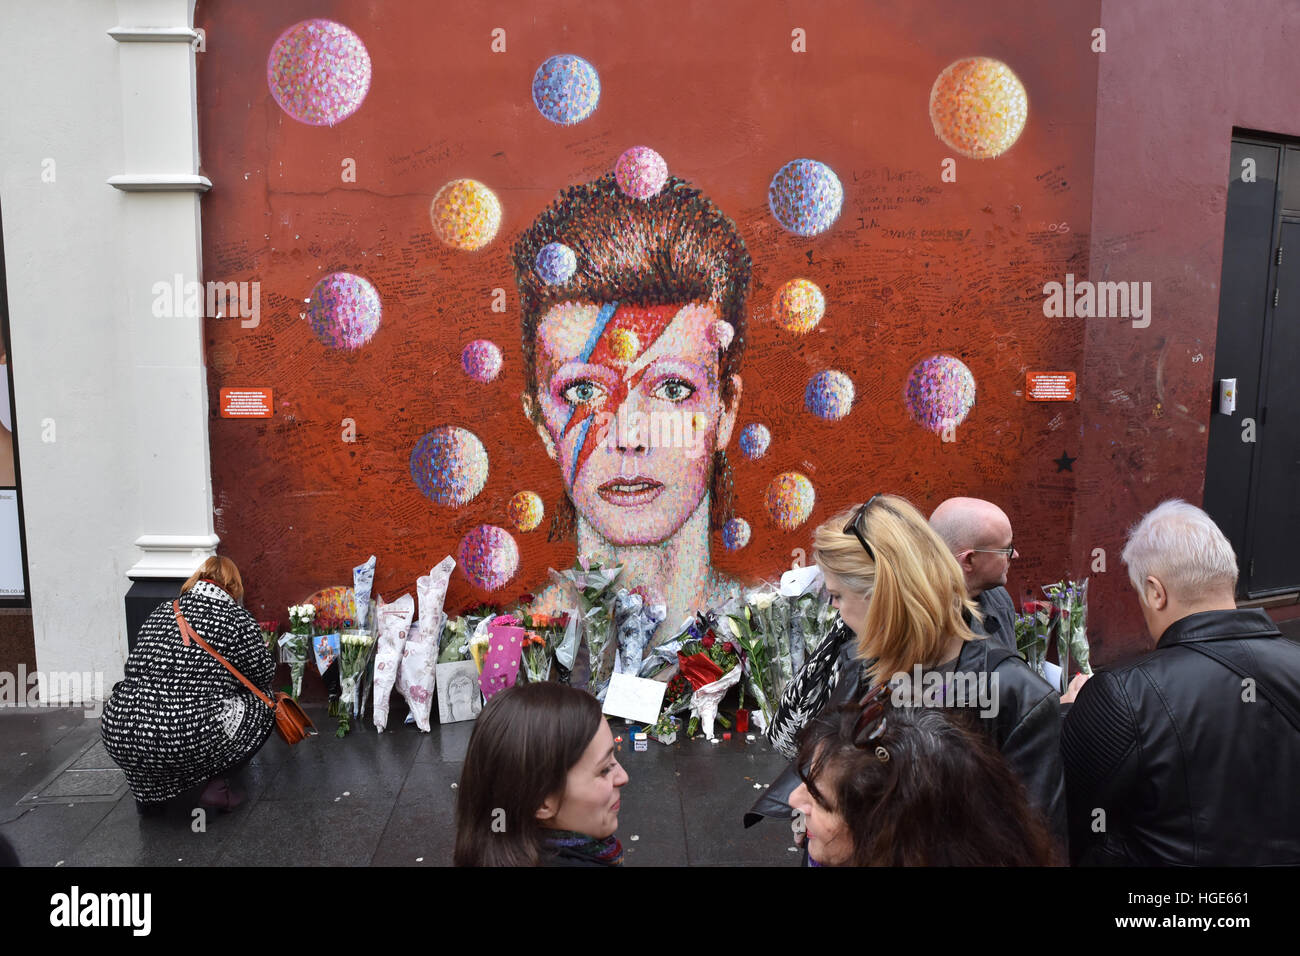 Brixton, London, UK. 8th January 2017. People at the mural in Brixton, respects David Bowie 70th birthday Stock Photo